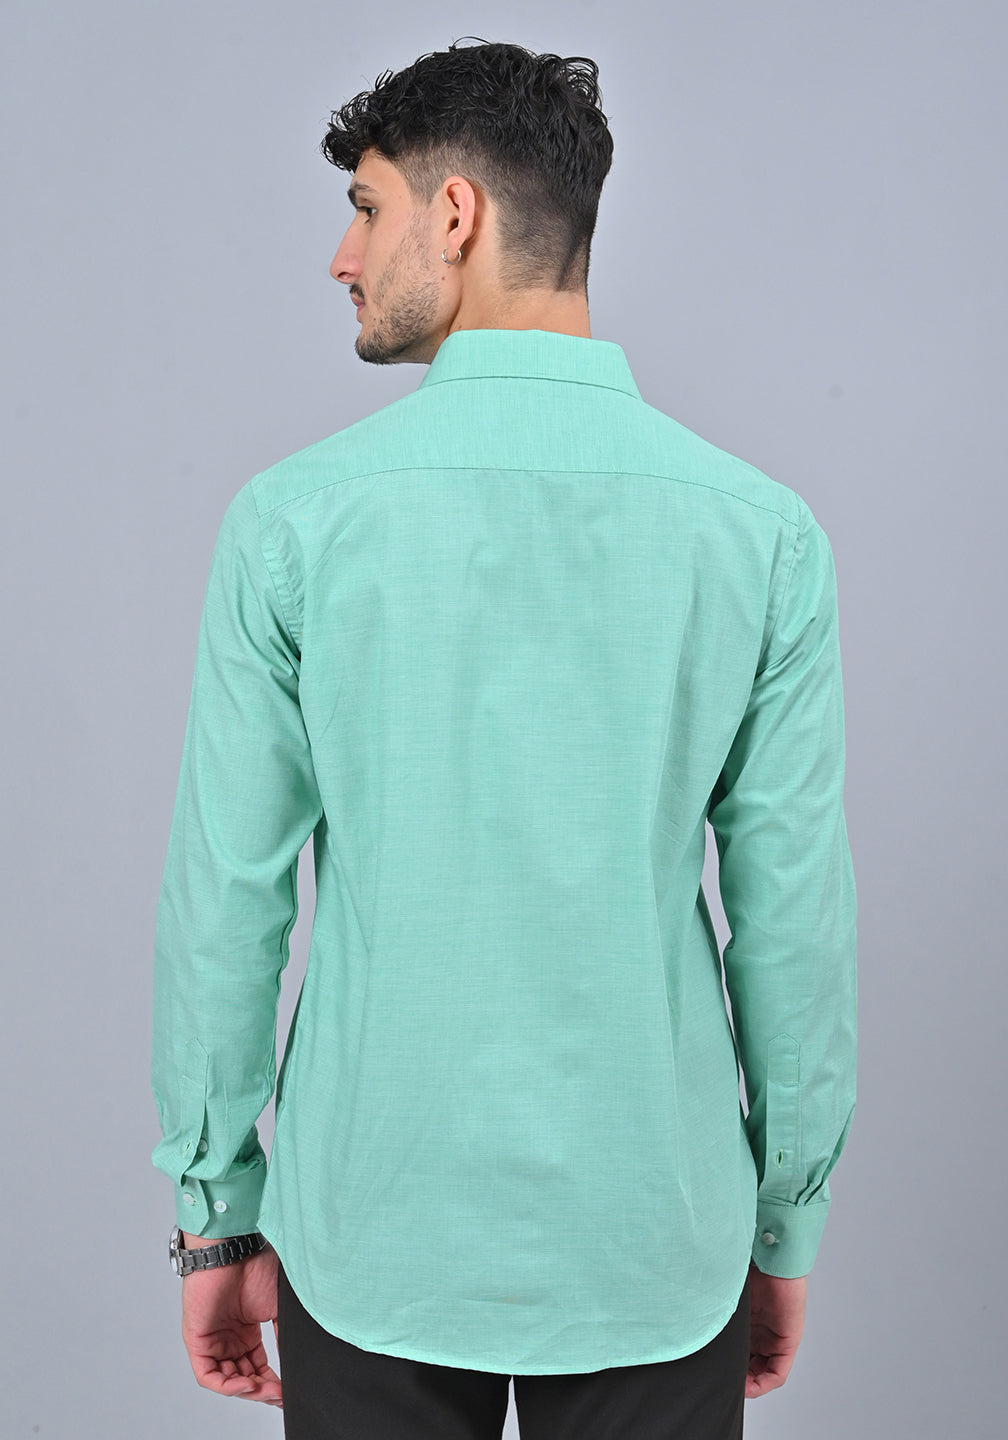 Pista Green Colour Solid Formal shirt